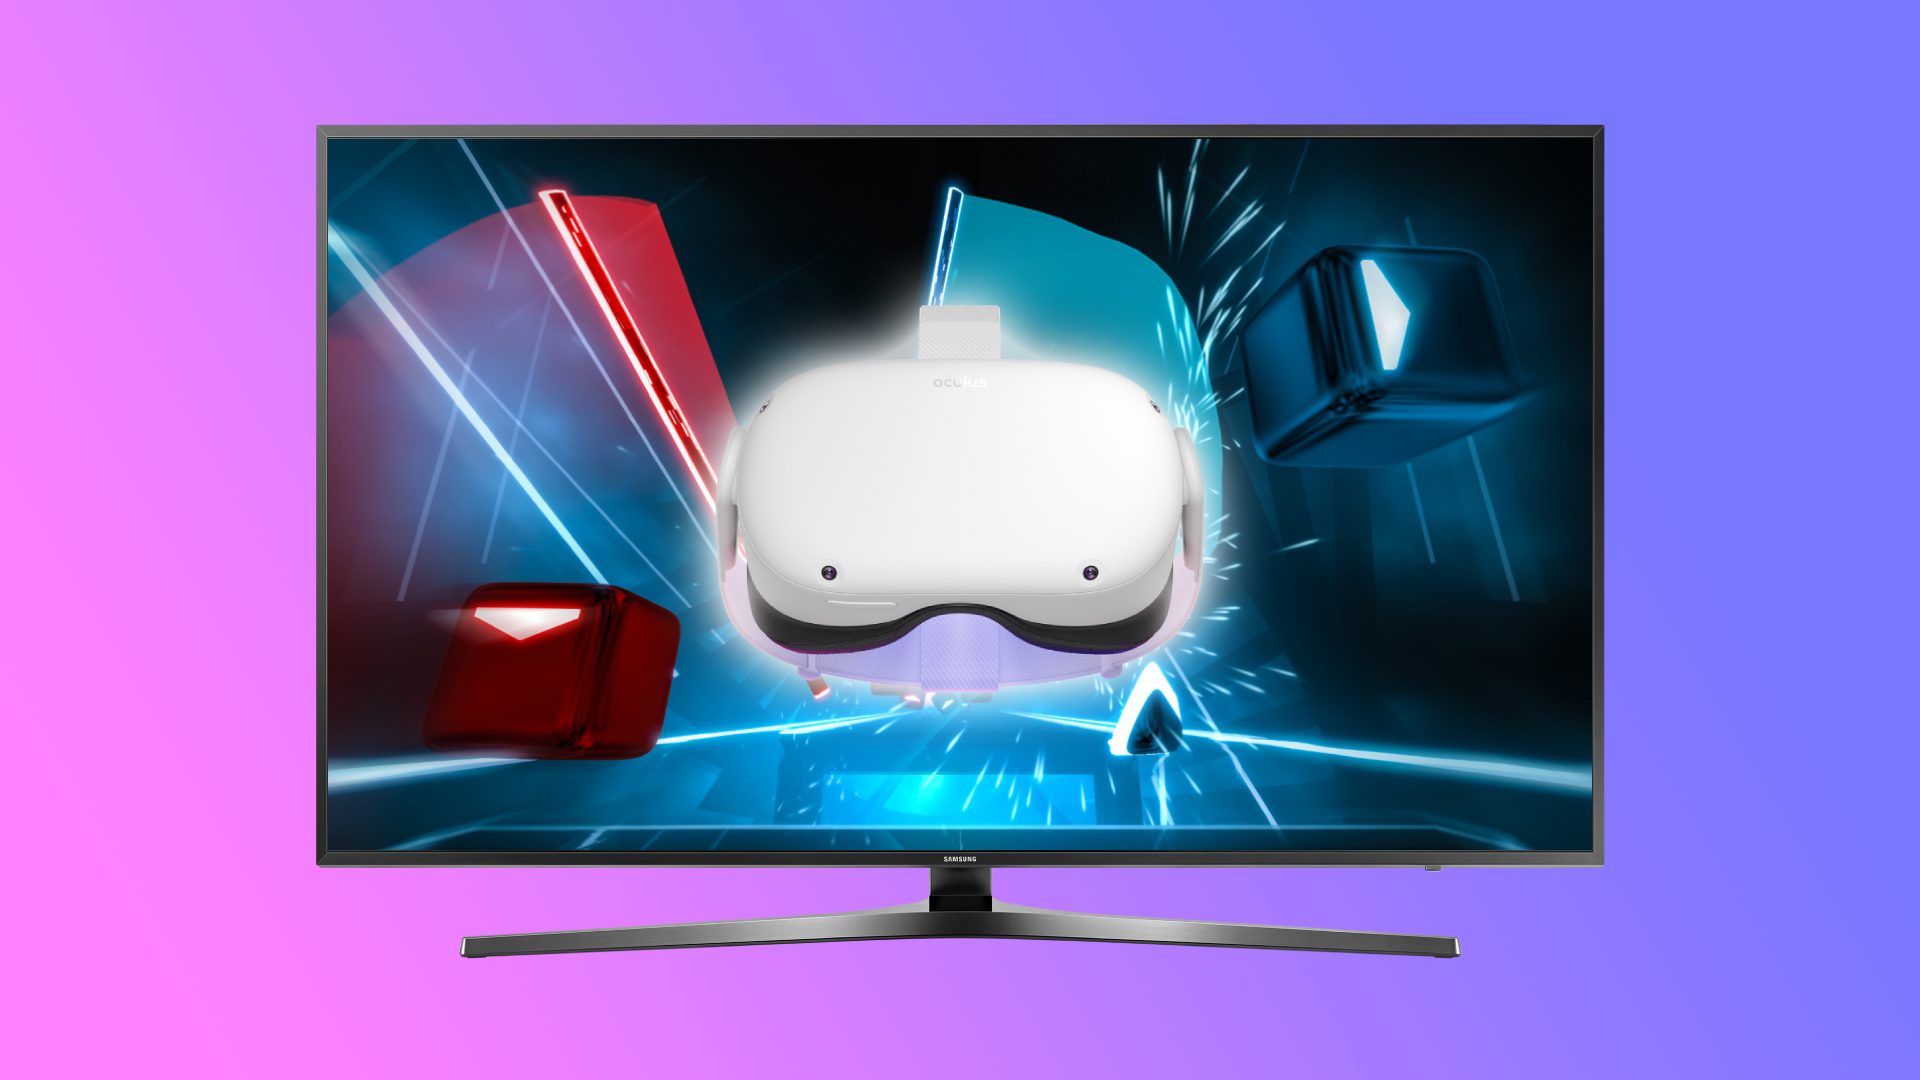 How To Cast Oculus Quest 2 To Smart TV